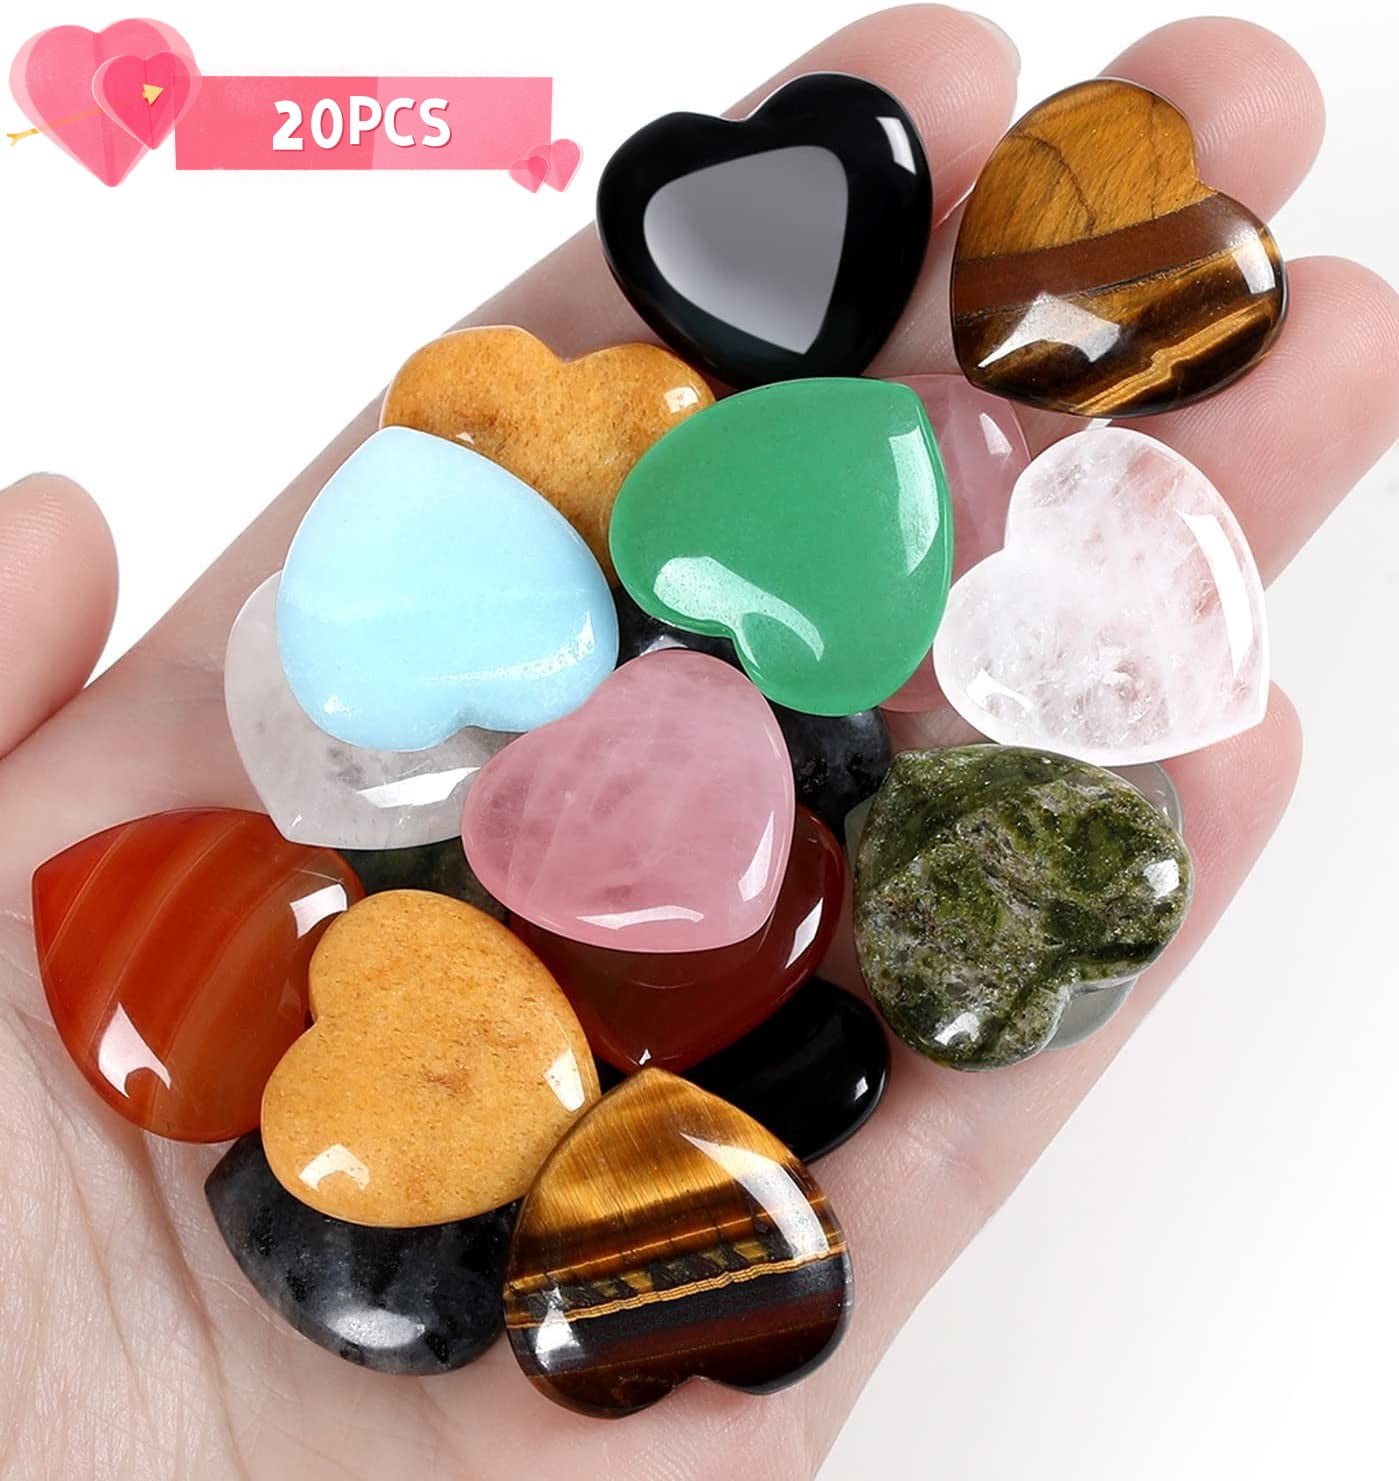 Bomutovy 20 Pcs Heart Shaped Gemstones Crystal Worry Stones Bulk Rocks 0.8  inch Mini Love Carved Stones Pocket Palm Thumb Gemstones for Witchcraft  Reiki Energy Balancing Meditation (Assorted Colors) 